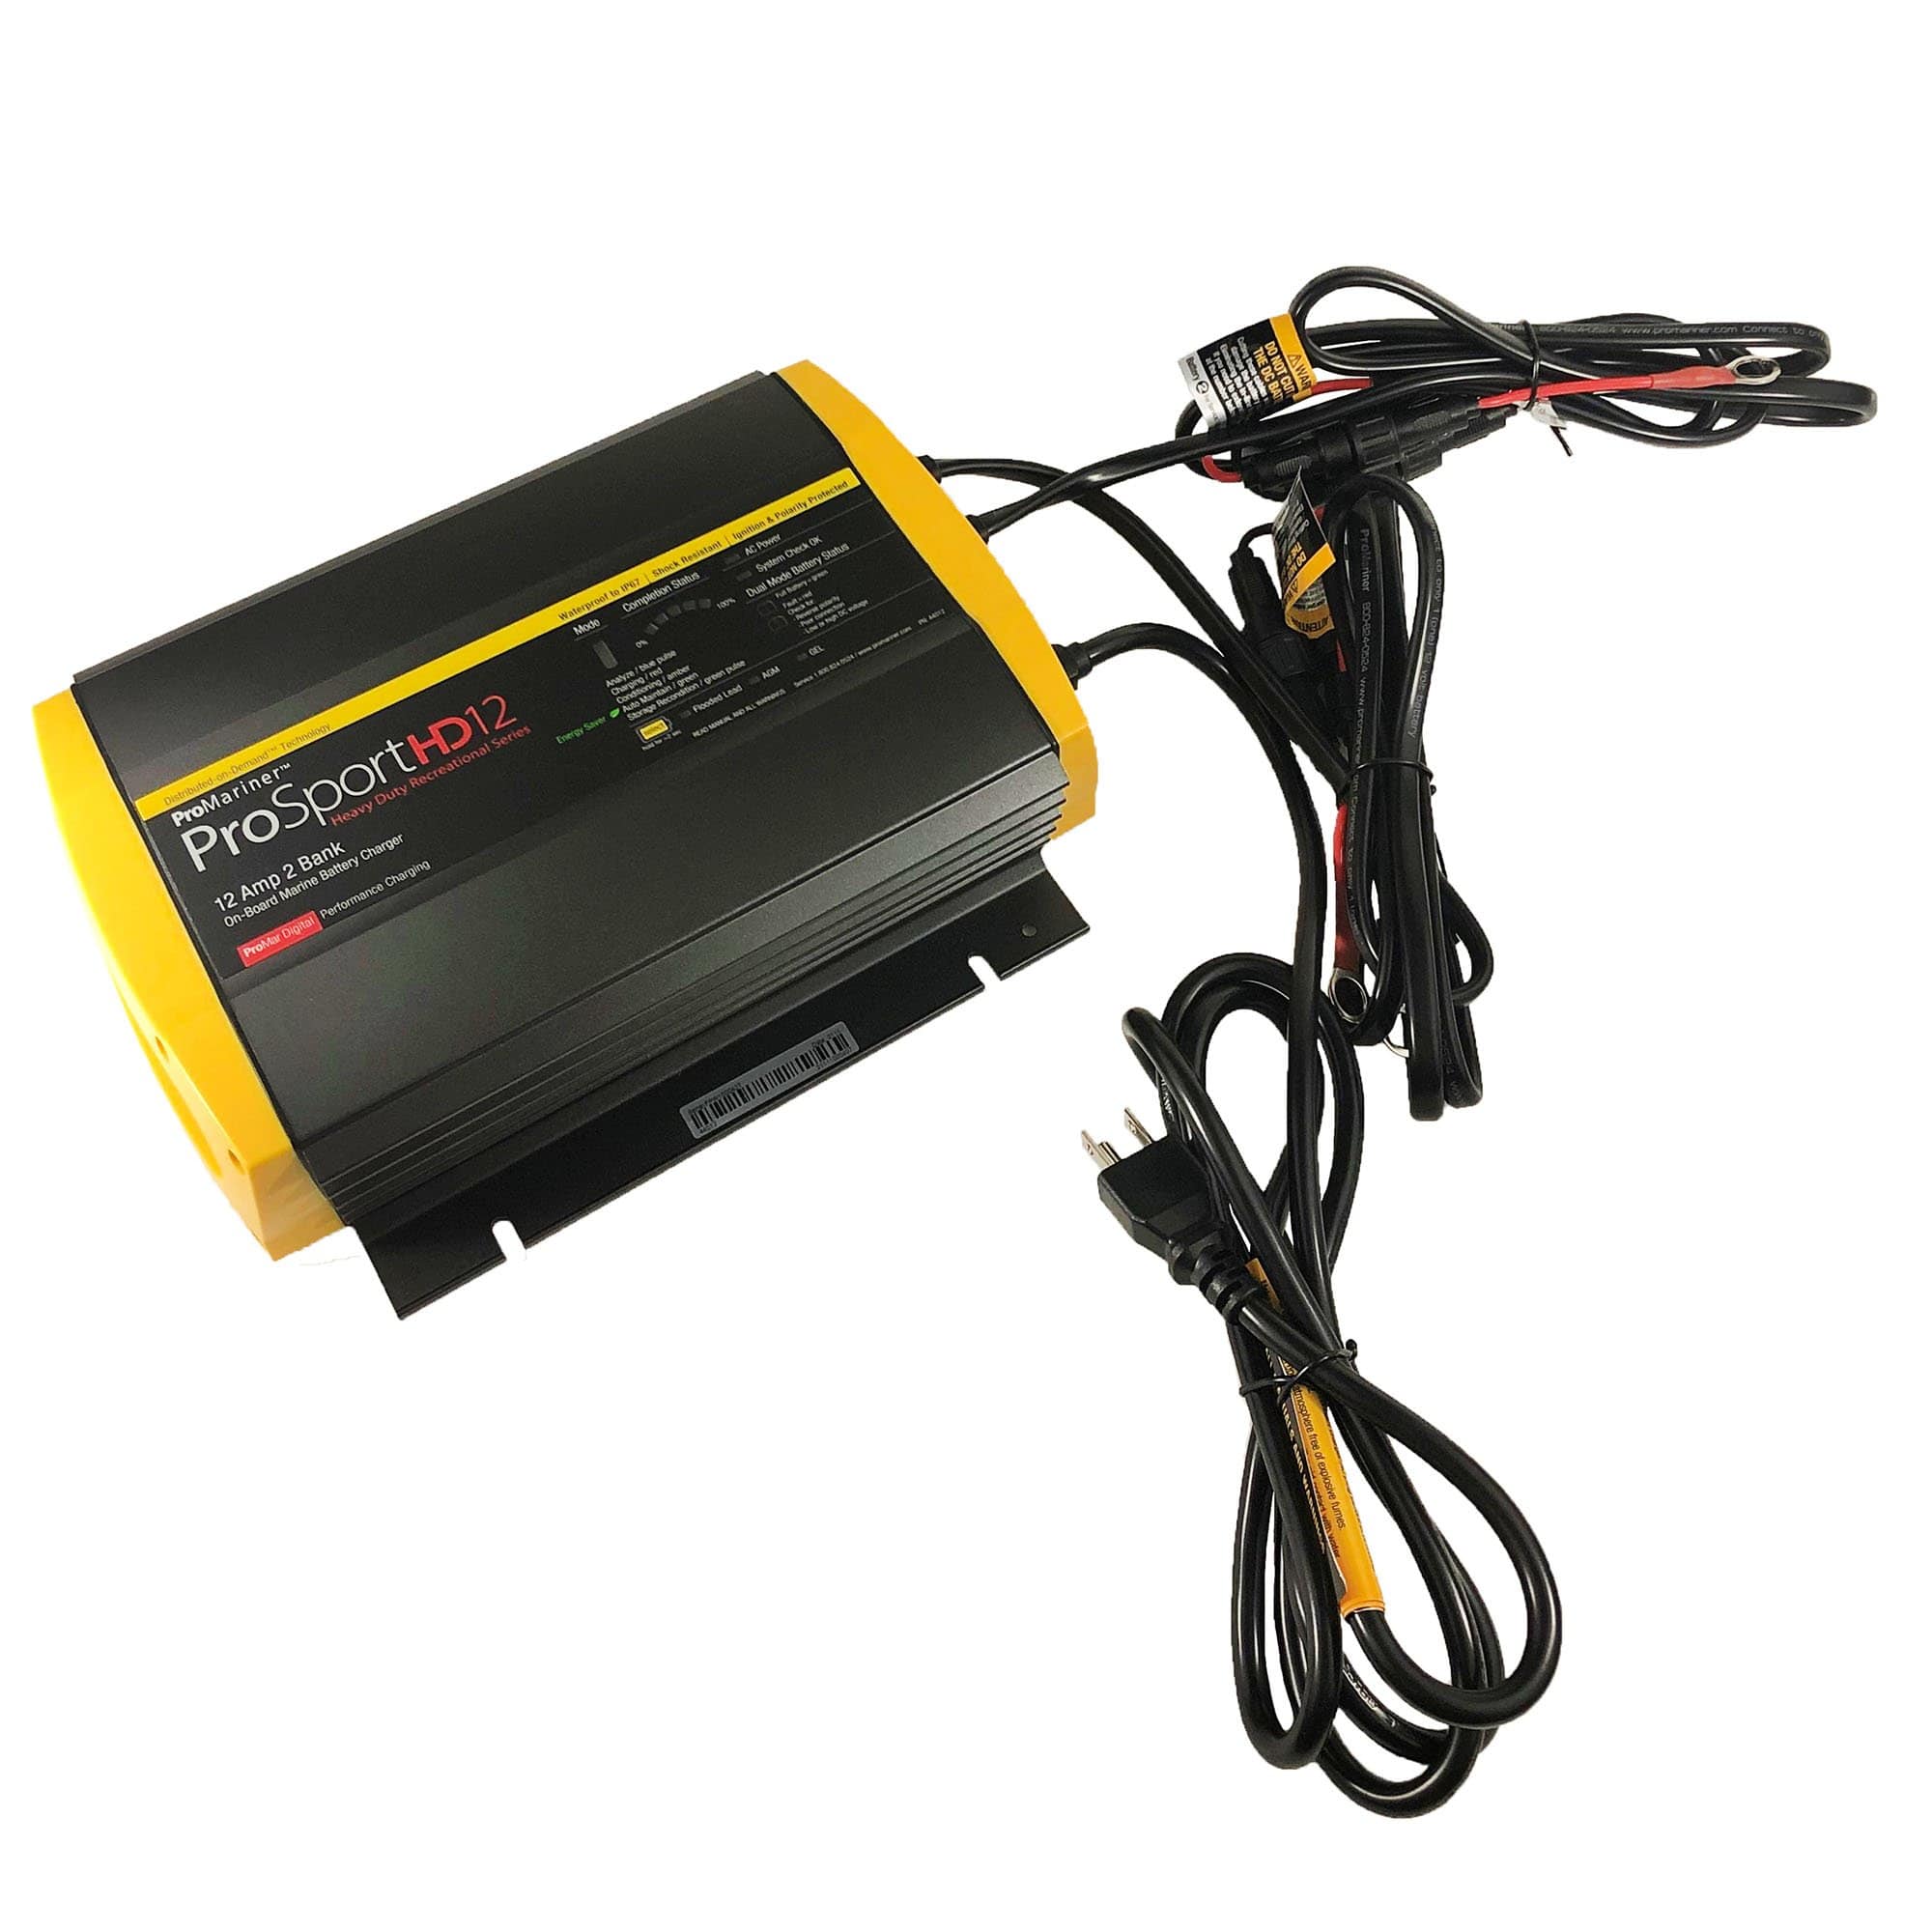 Power Products 44012 Pro Mariner ProSport HD 12, 12 Amp, 2 Bank Battery Charger